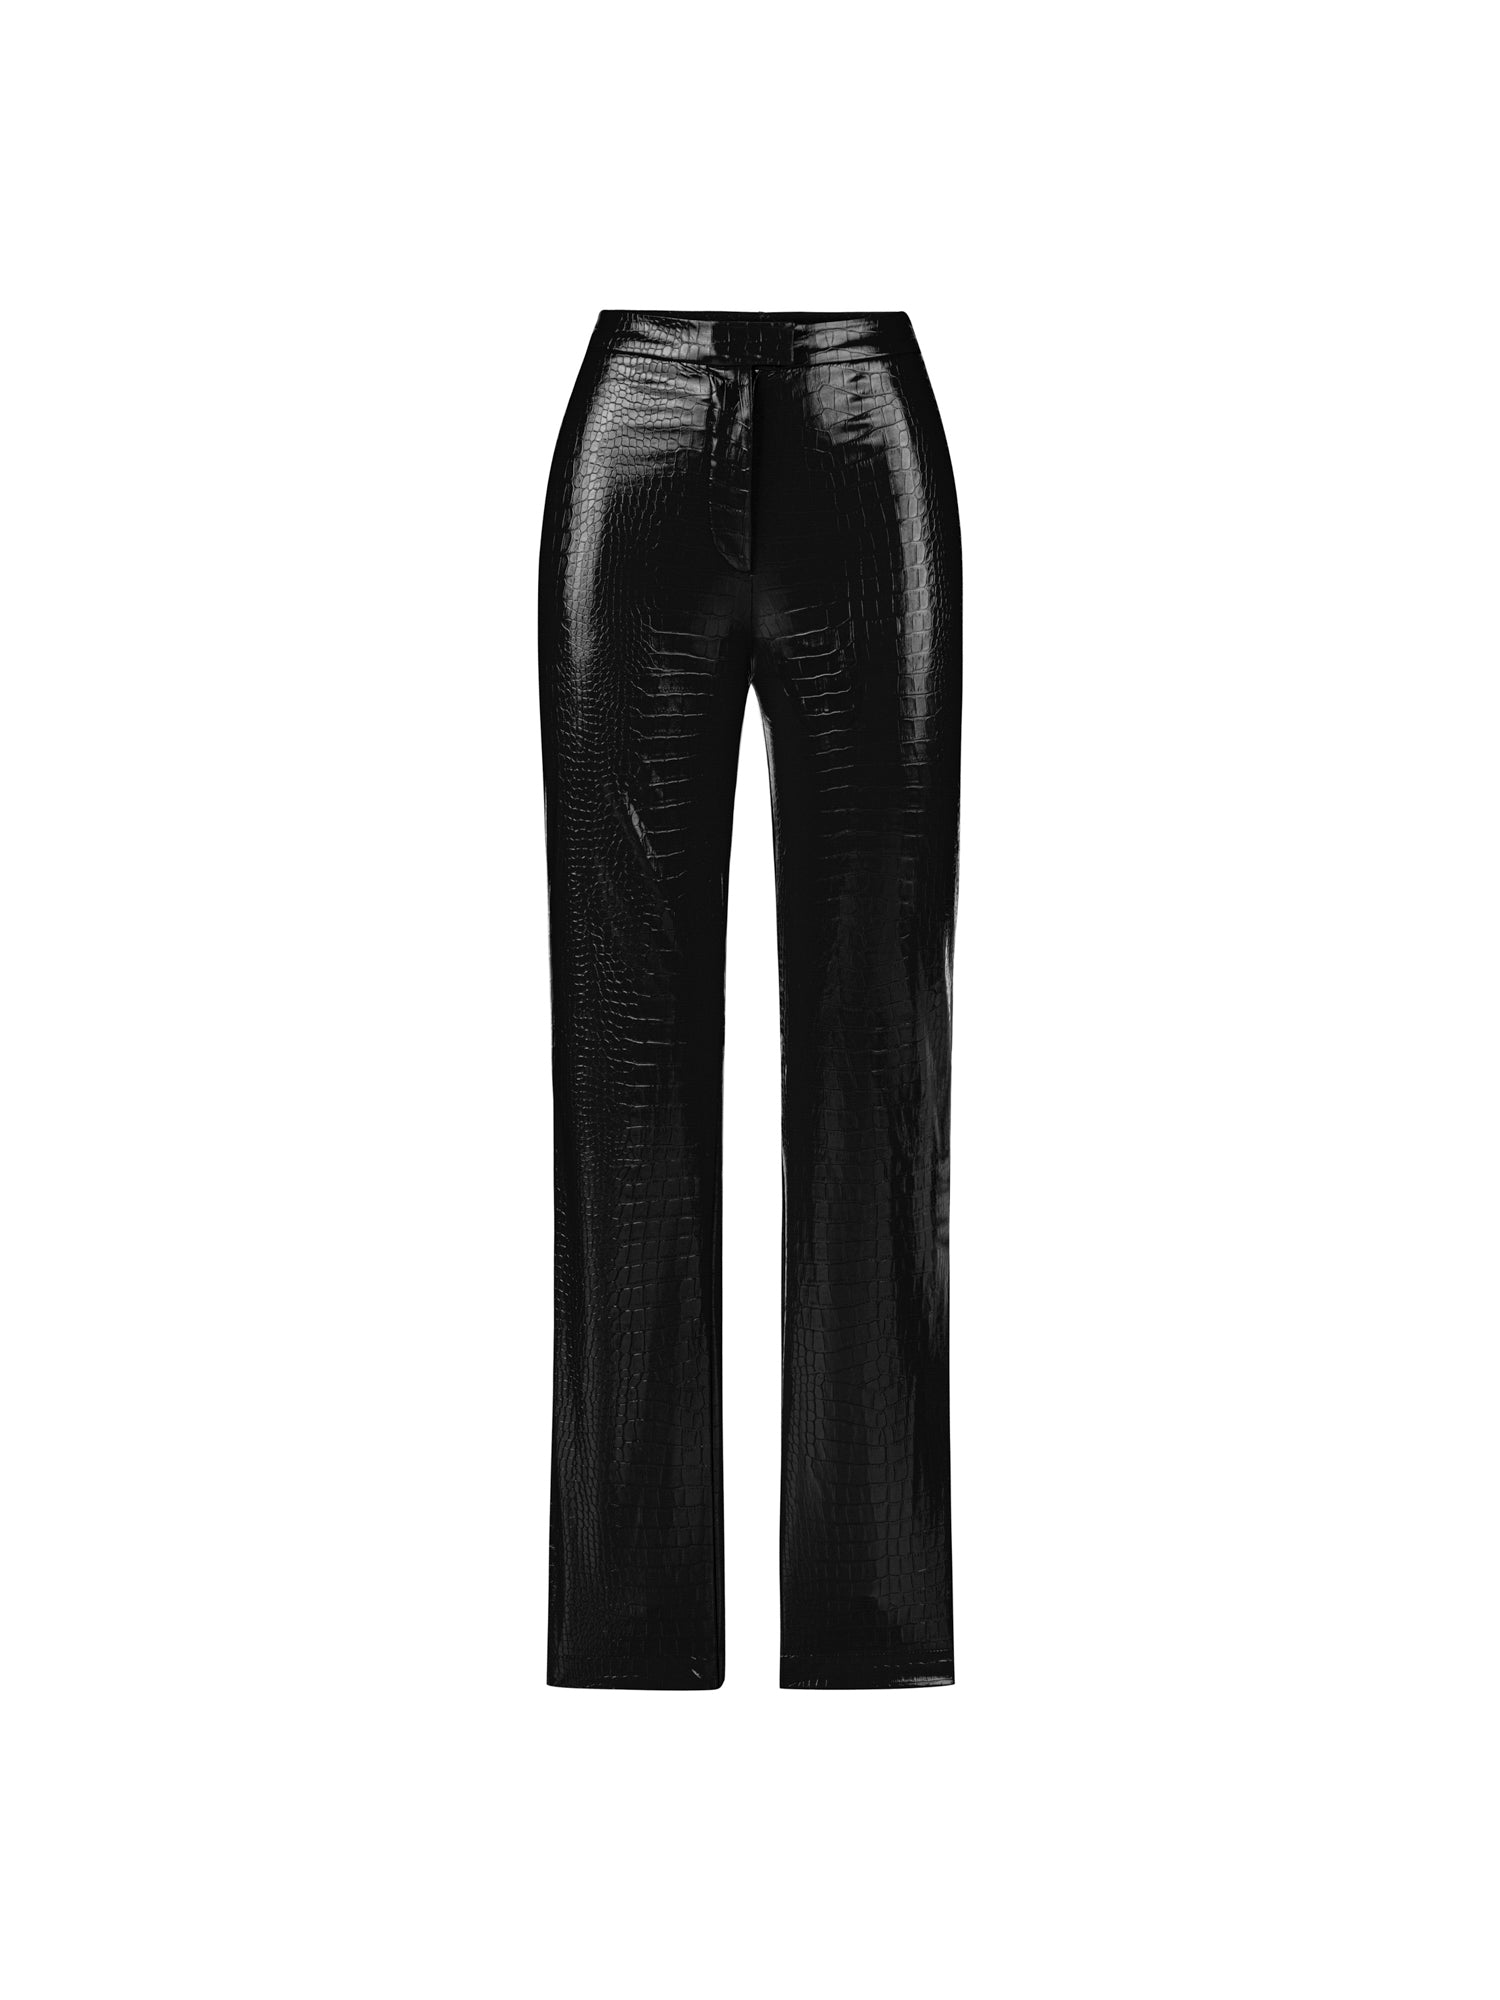 AMI in Shiny Black Leather Trousers